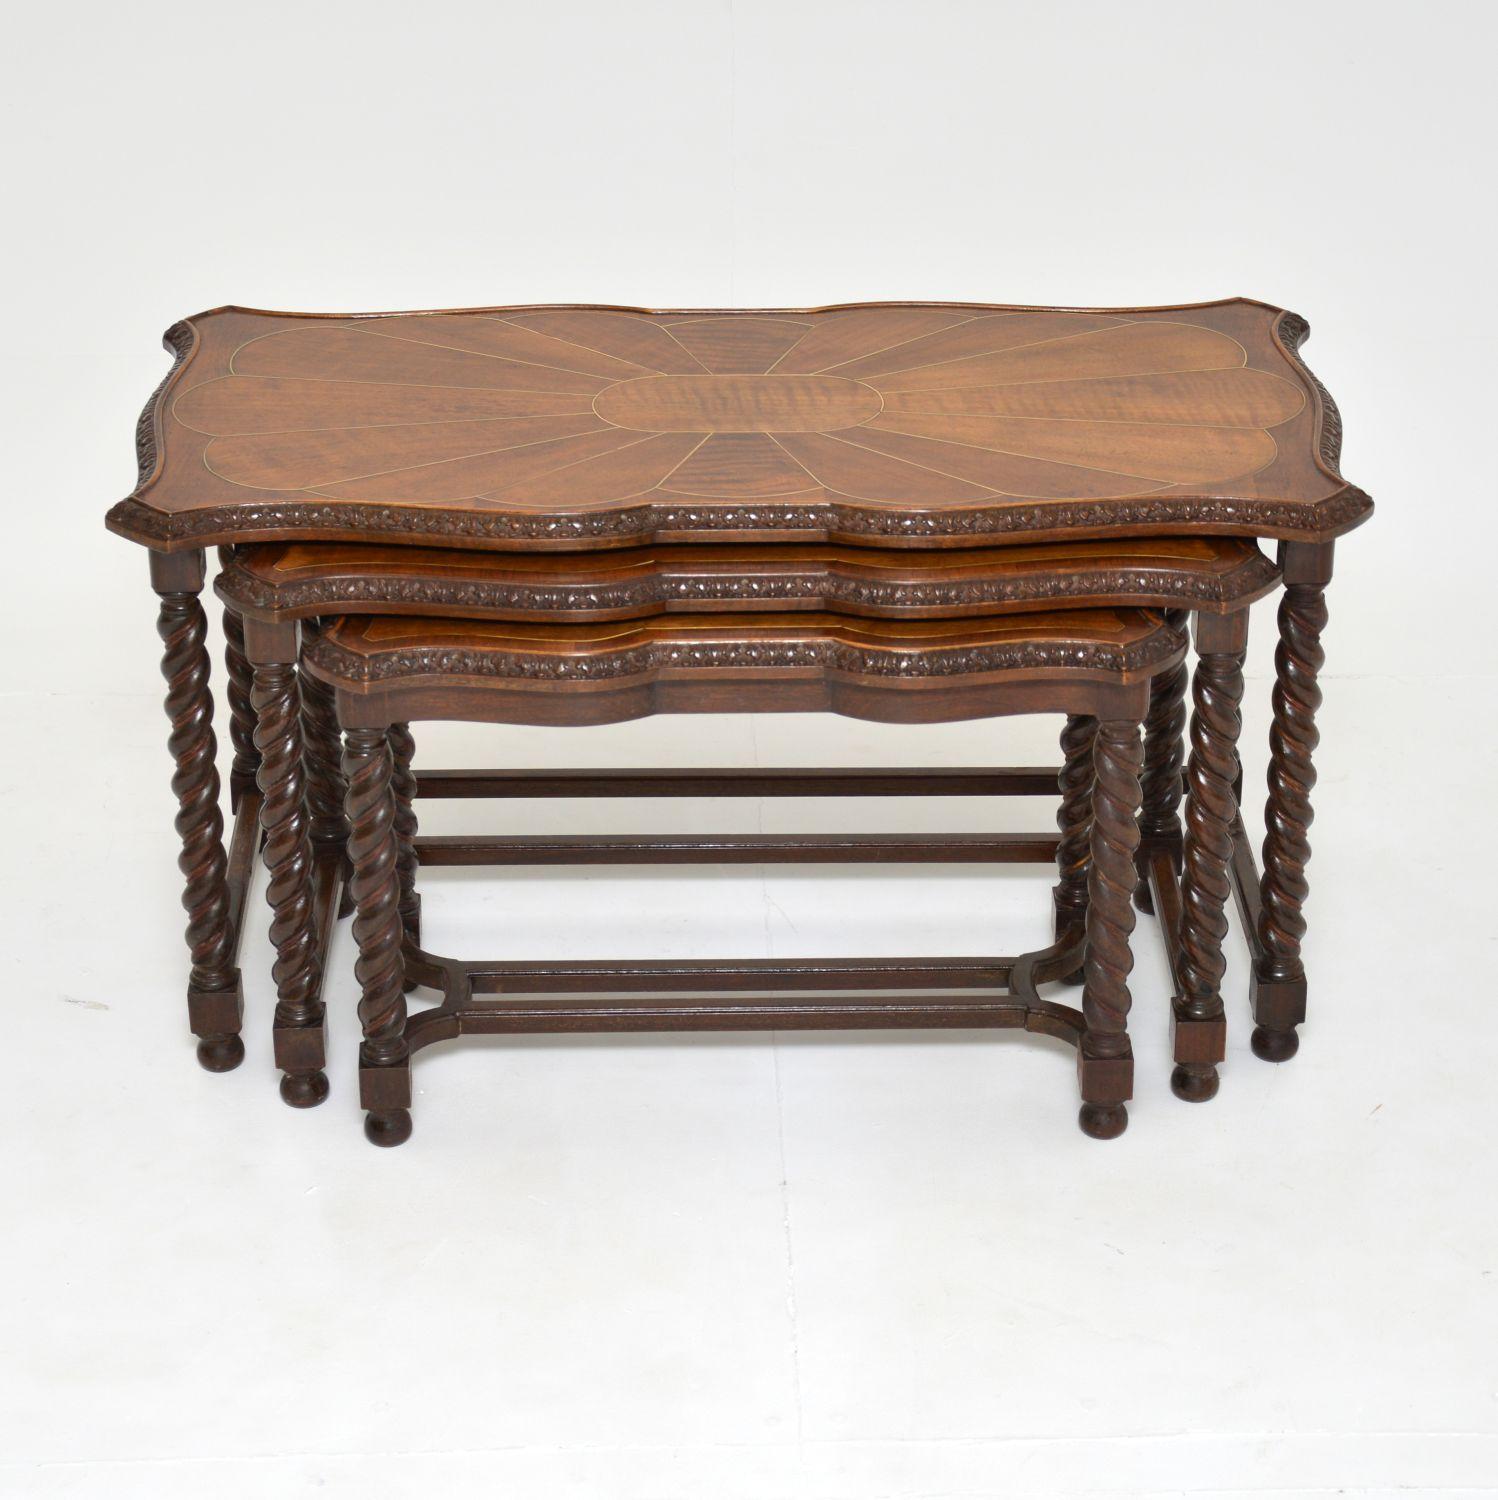 A very unusual and incredibly well made antique nesting coffee table. This was made in England, it dates from around the 1920-30’s.

This has a very useful design, and the quality is amazing. The serpentine shaped edges have crisp and intricate